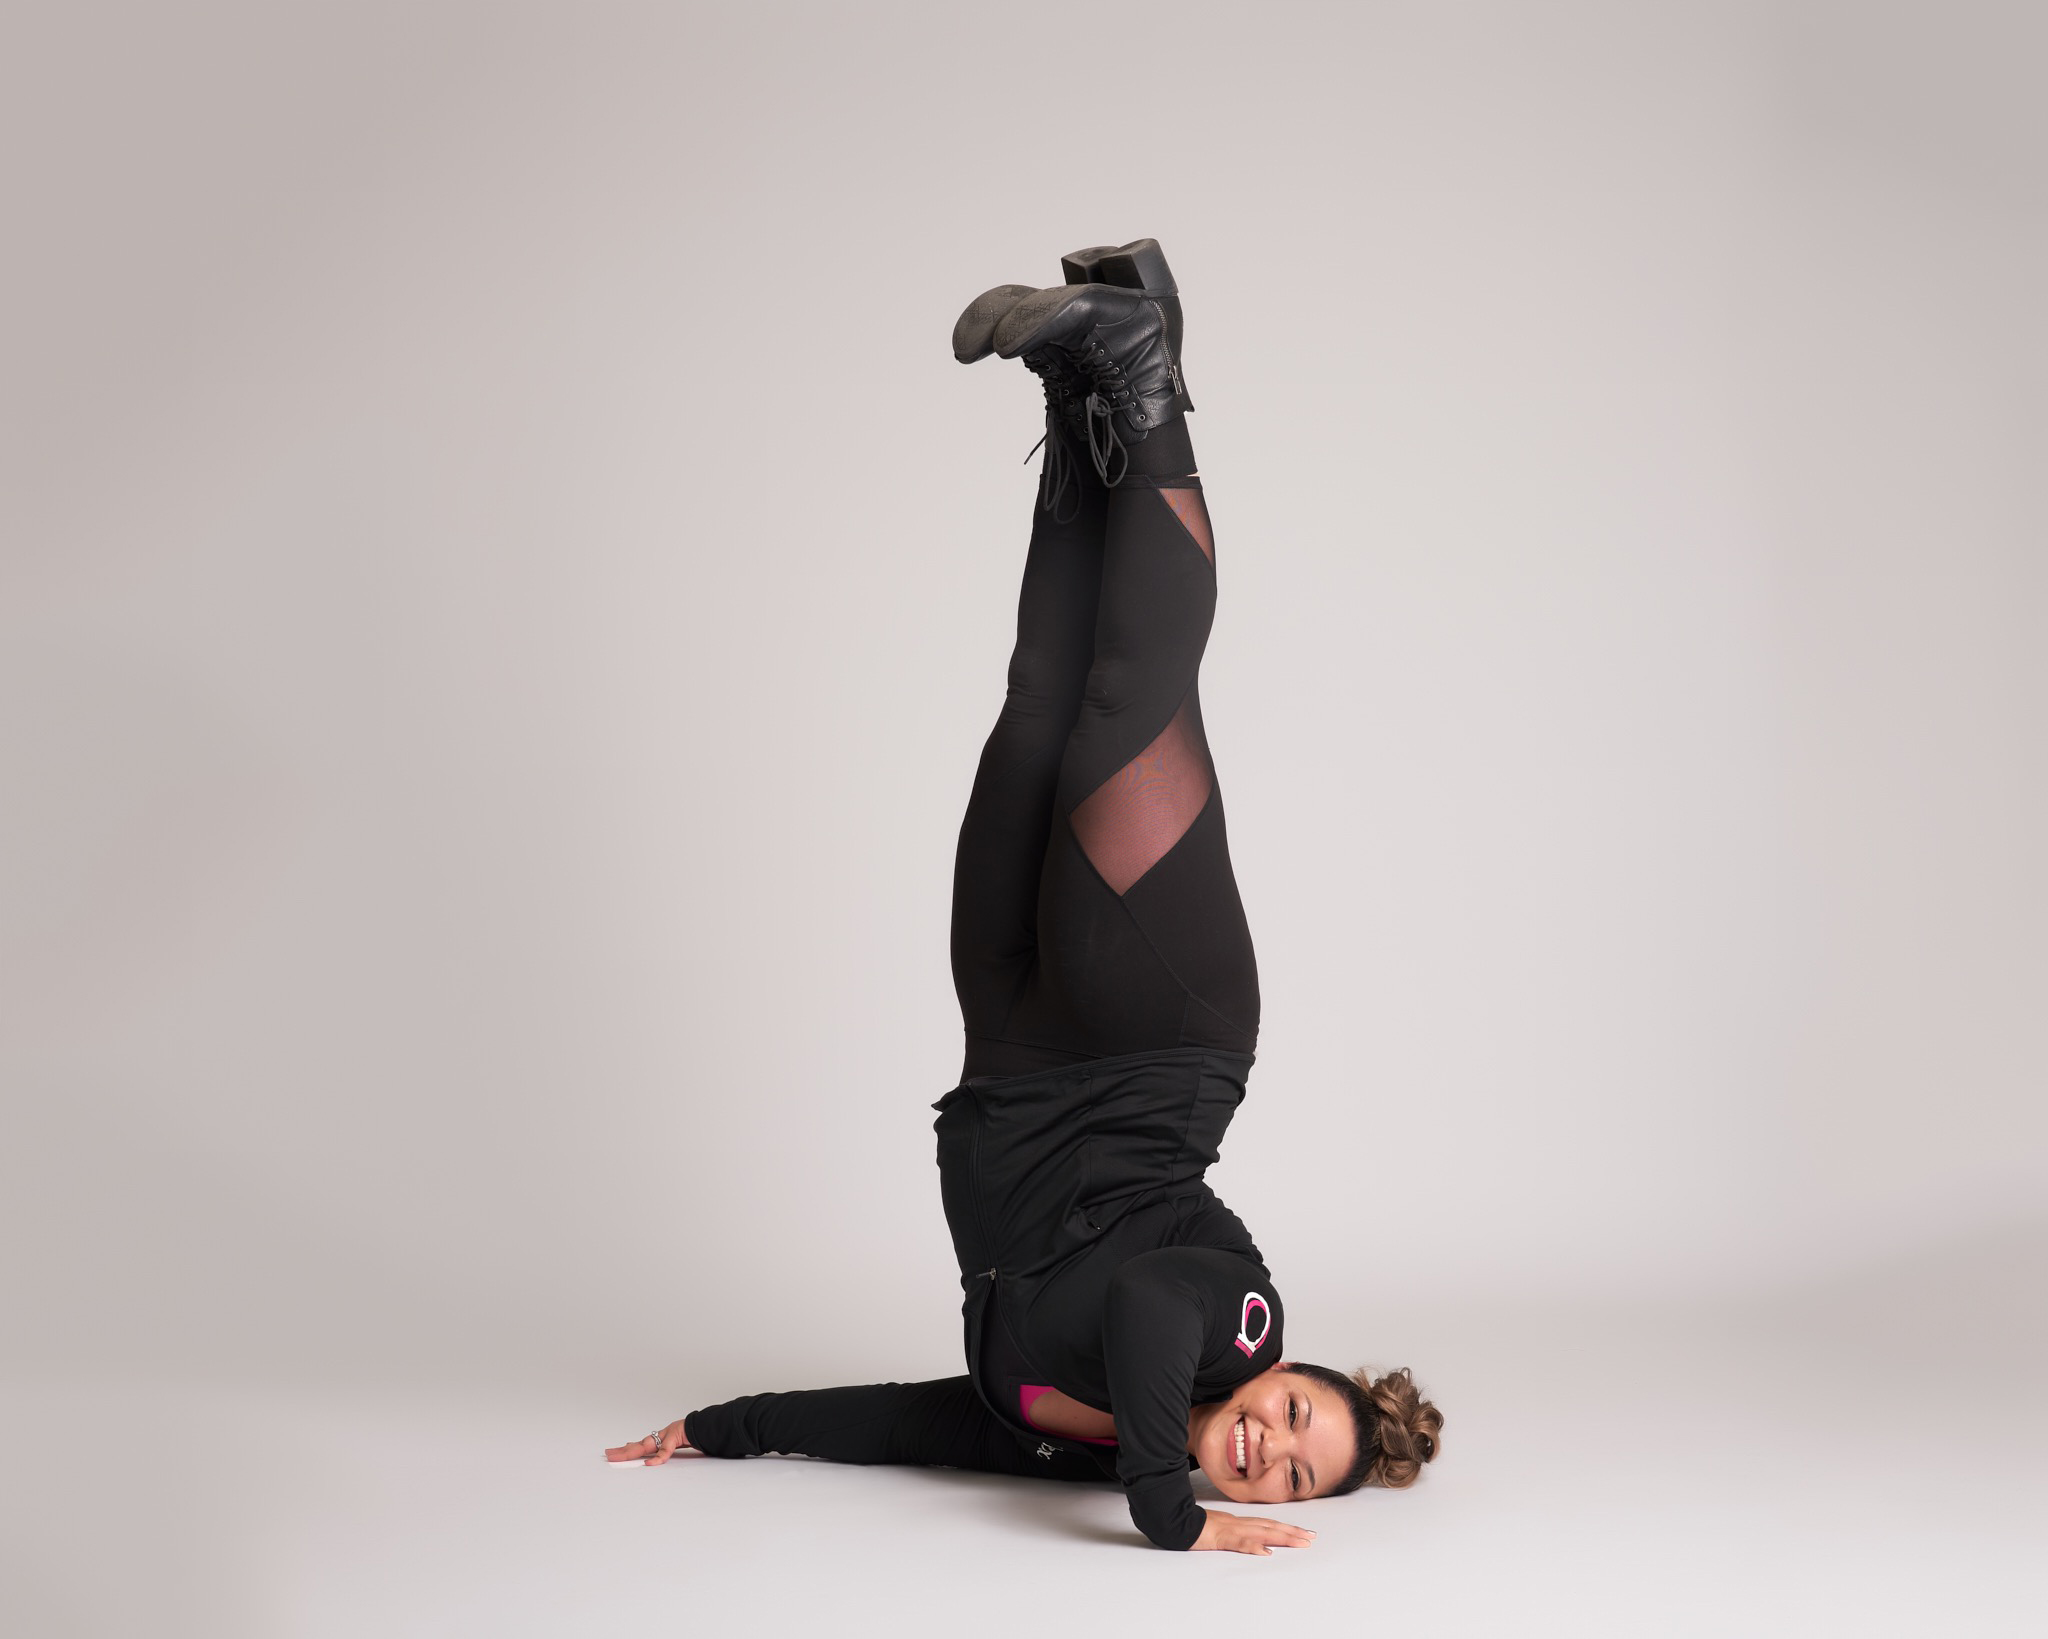 a female dancer wearing black balancing on her shoulder with her legs straight up